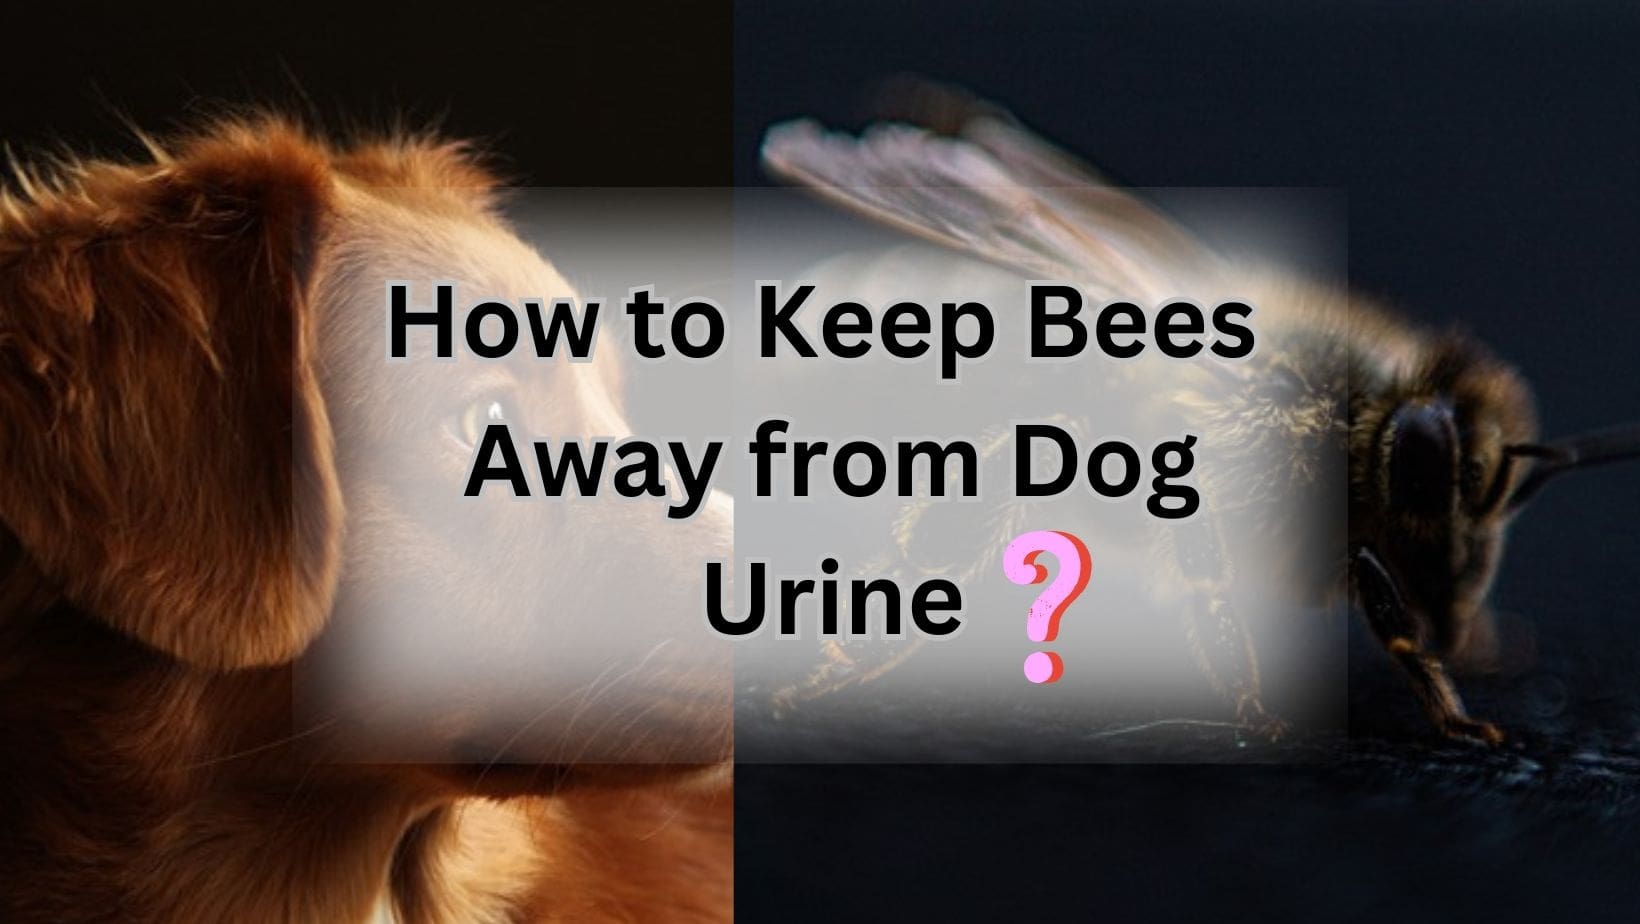 How to Keep Bees Away from Dog Urine?